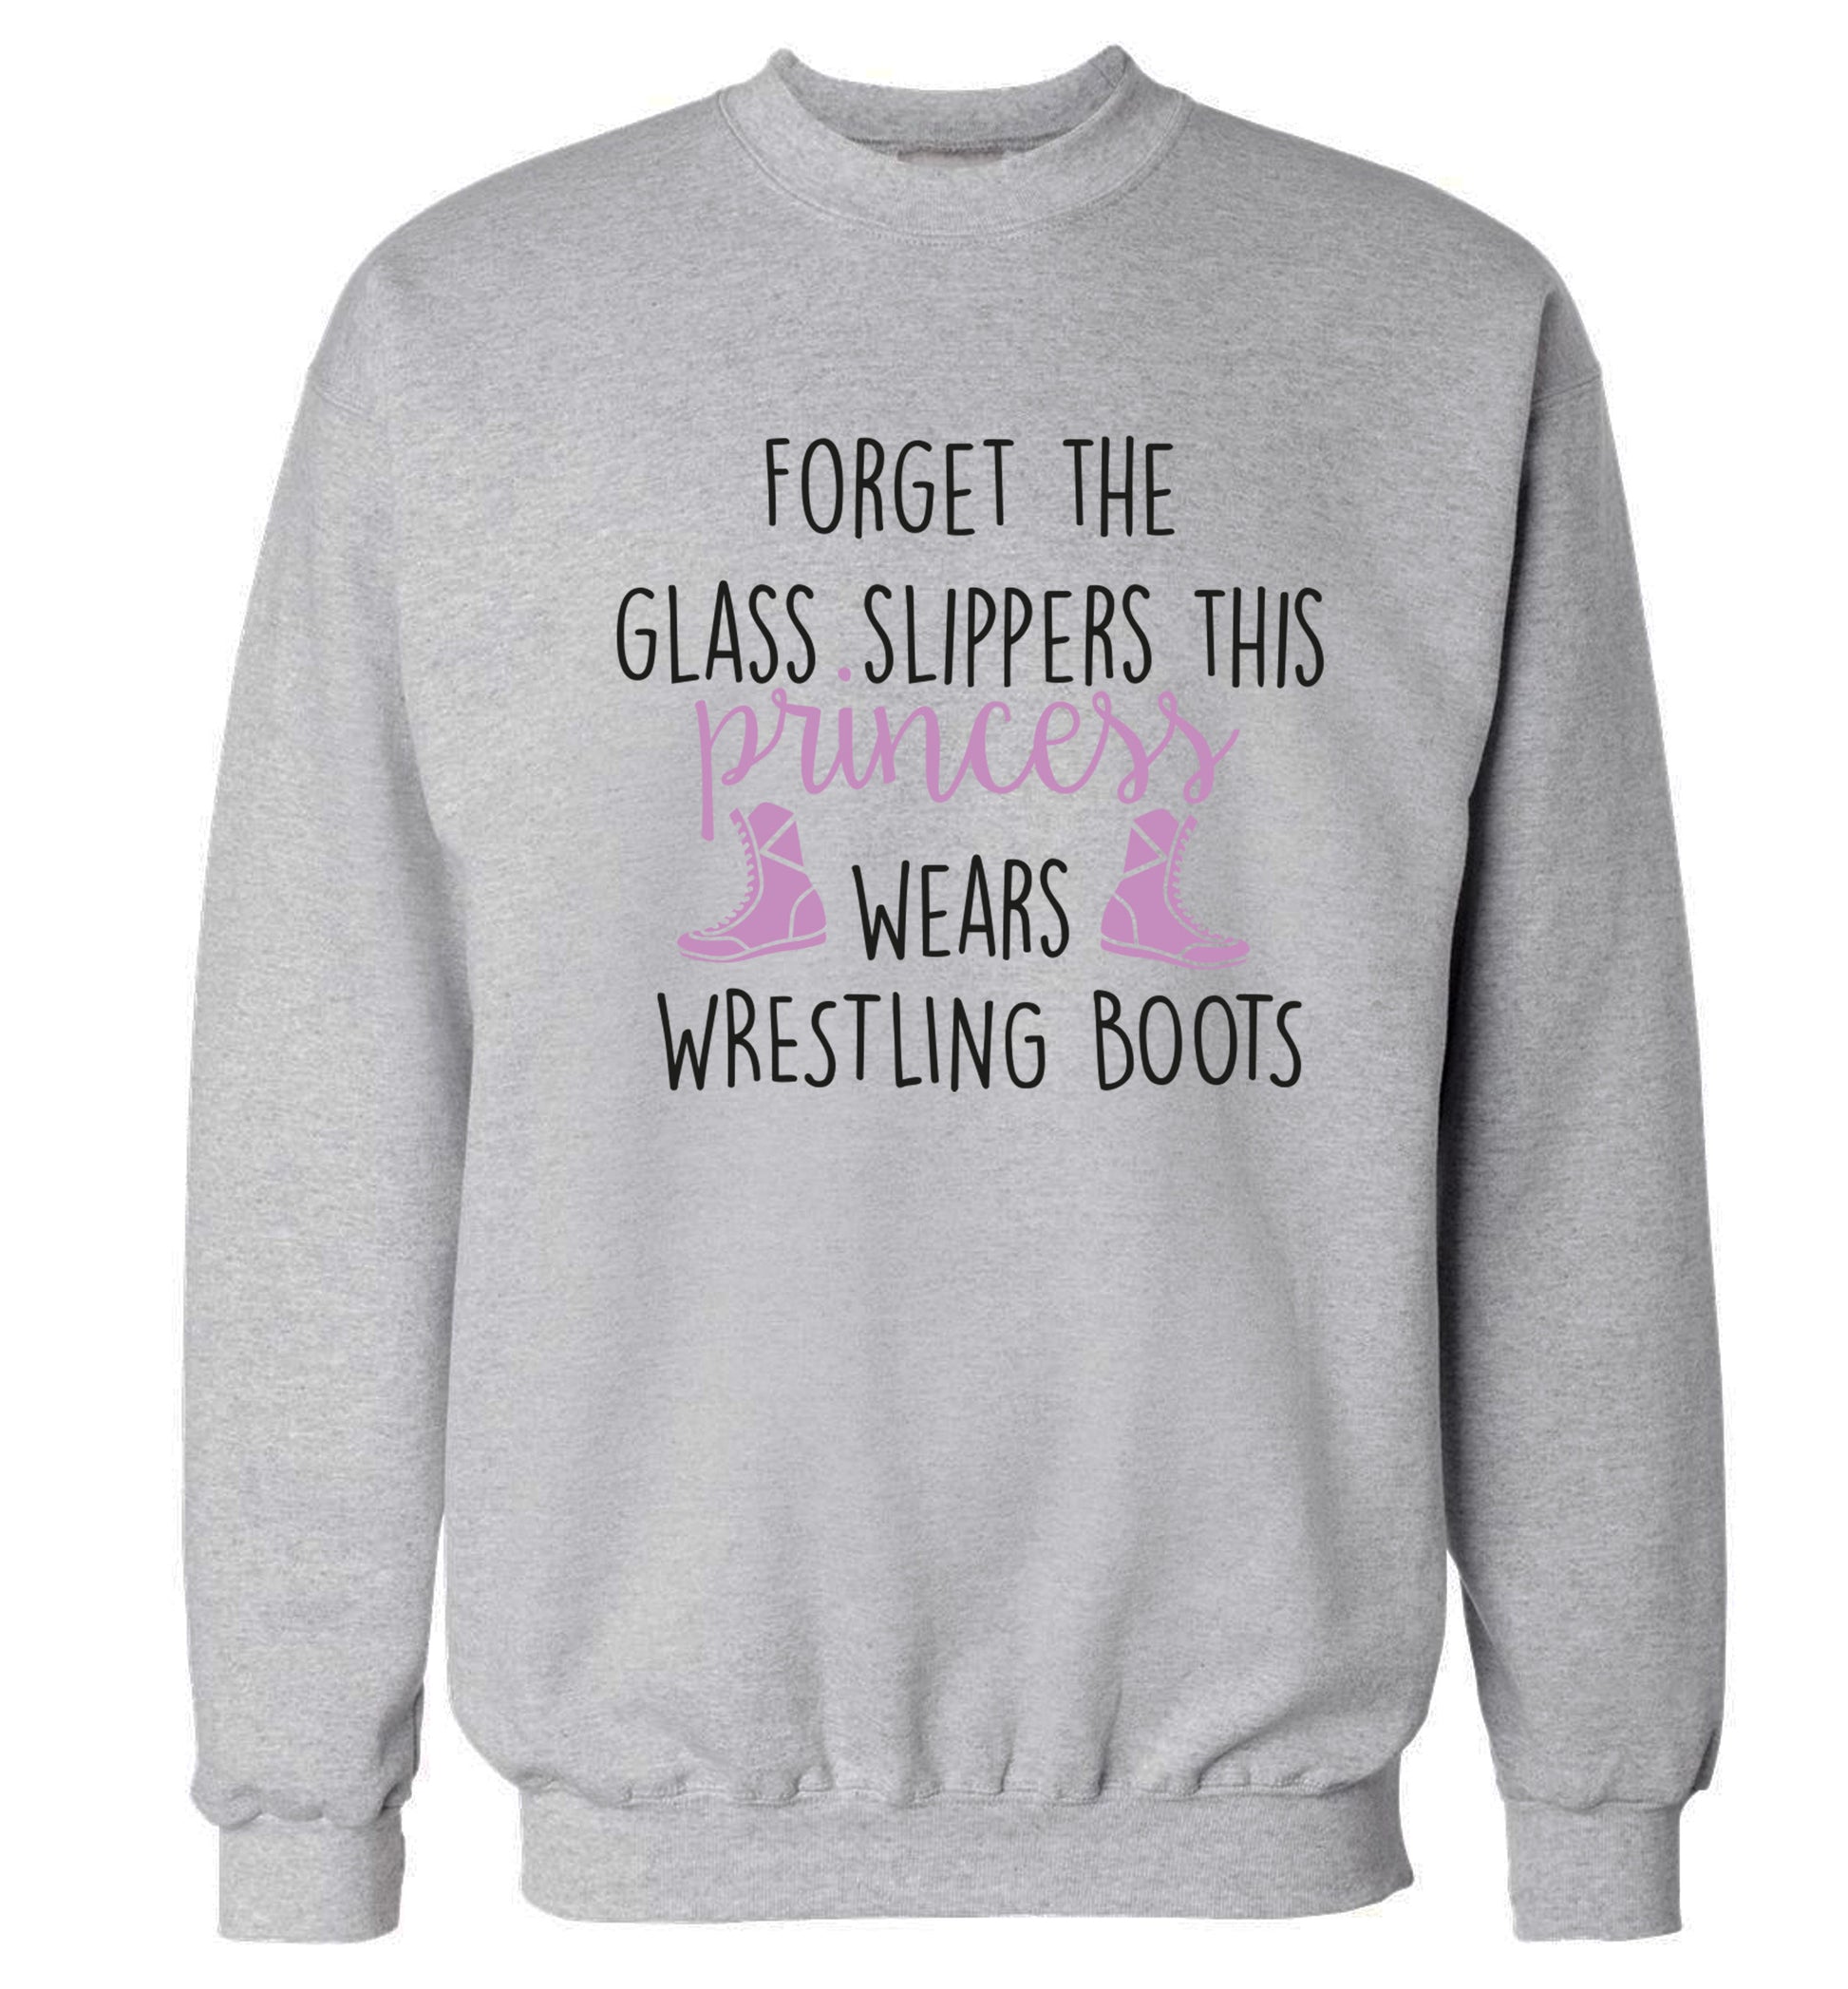 Forget the glass slippers this princess wears wrestling boots Adult's unisex grey Sweater 2XL